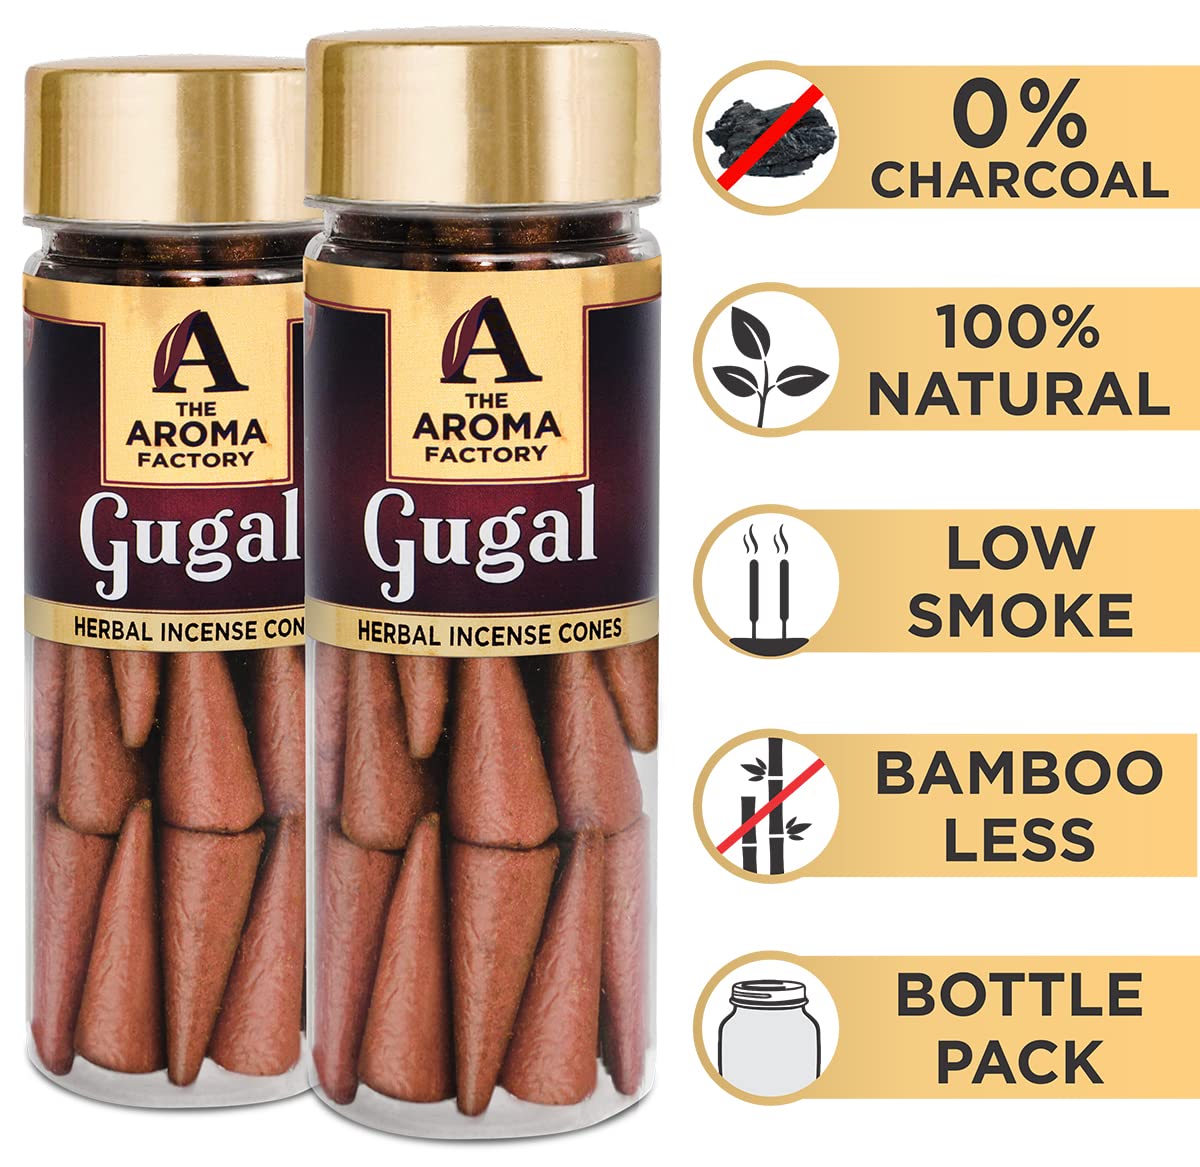 The Aroma Factory Incense Dhoop Cone for Pooja, Gugal (100% Herbal & 0% Charcoal) 2 Bottles x 30 Cones